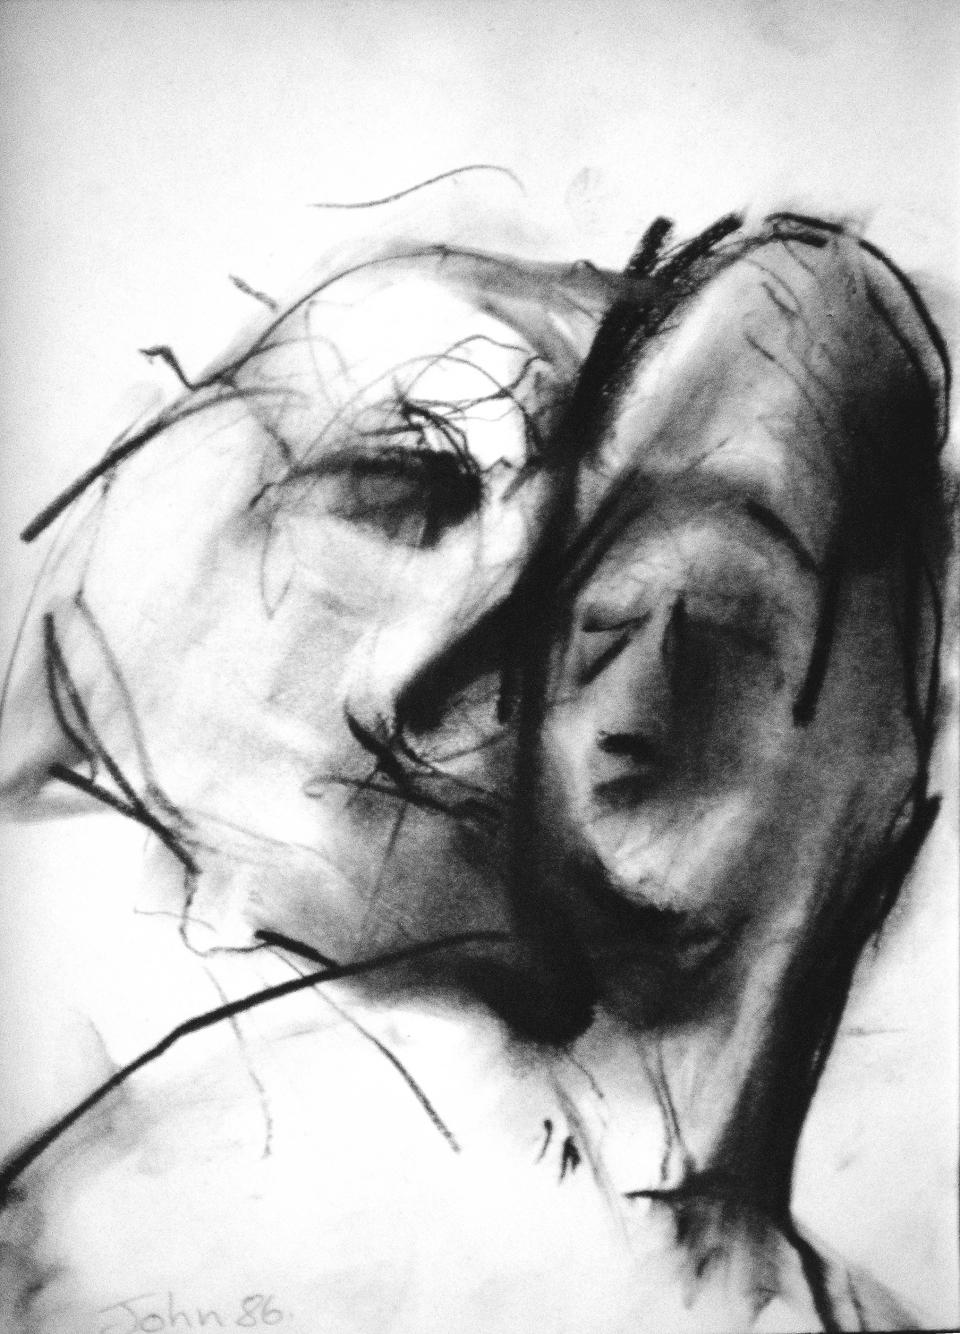 spirit  1985  charcoal on paper  18 x 23 cm  SOLD